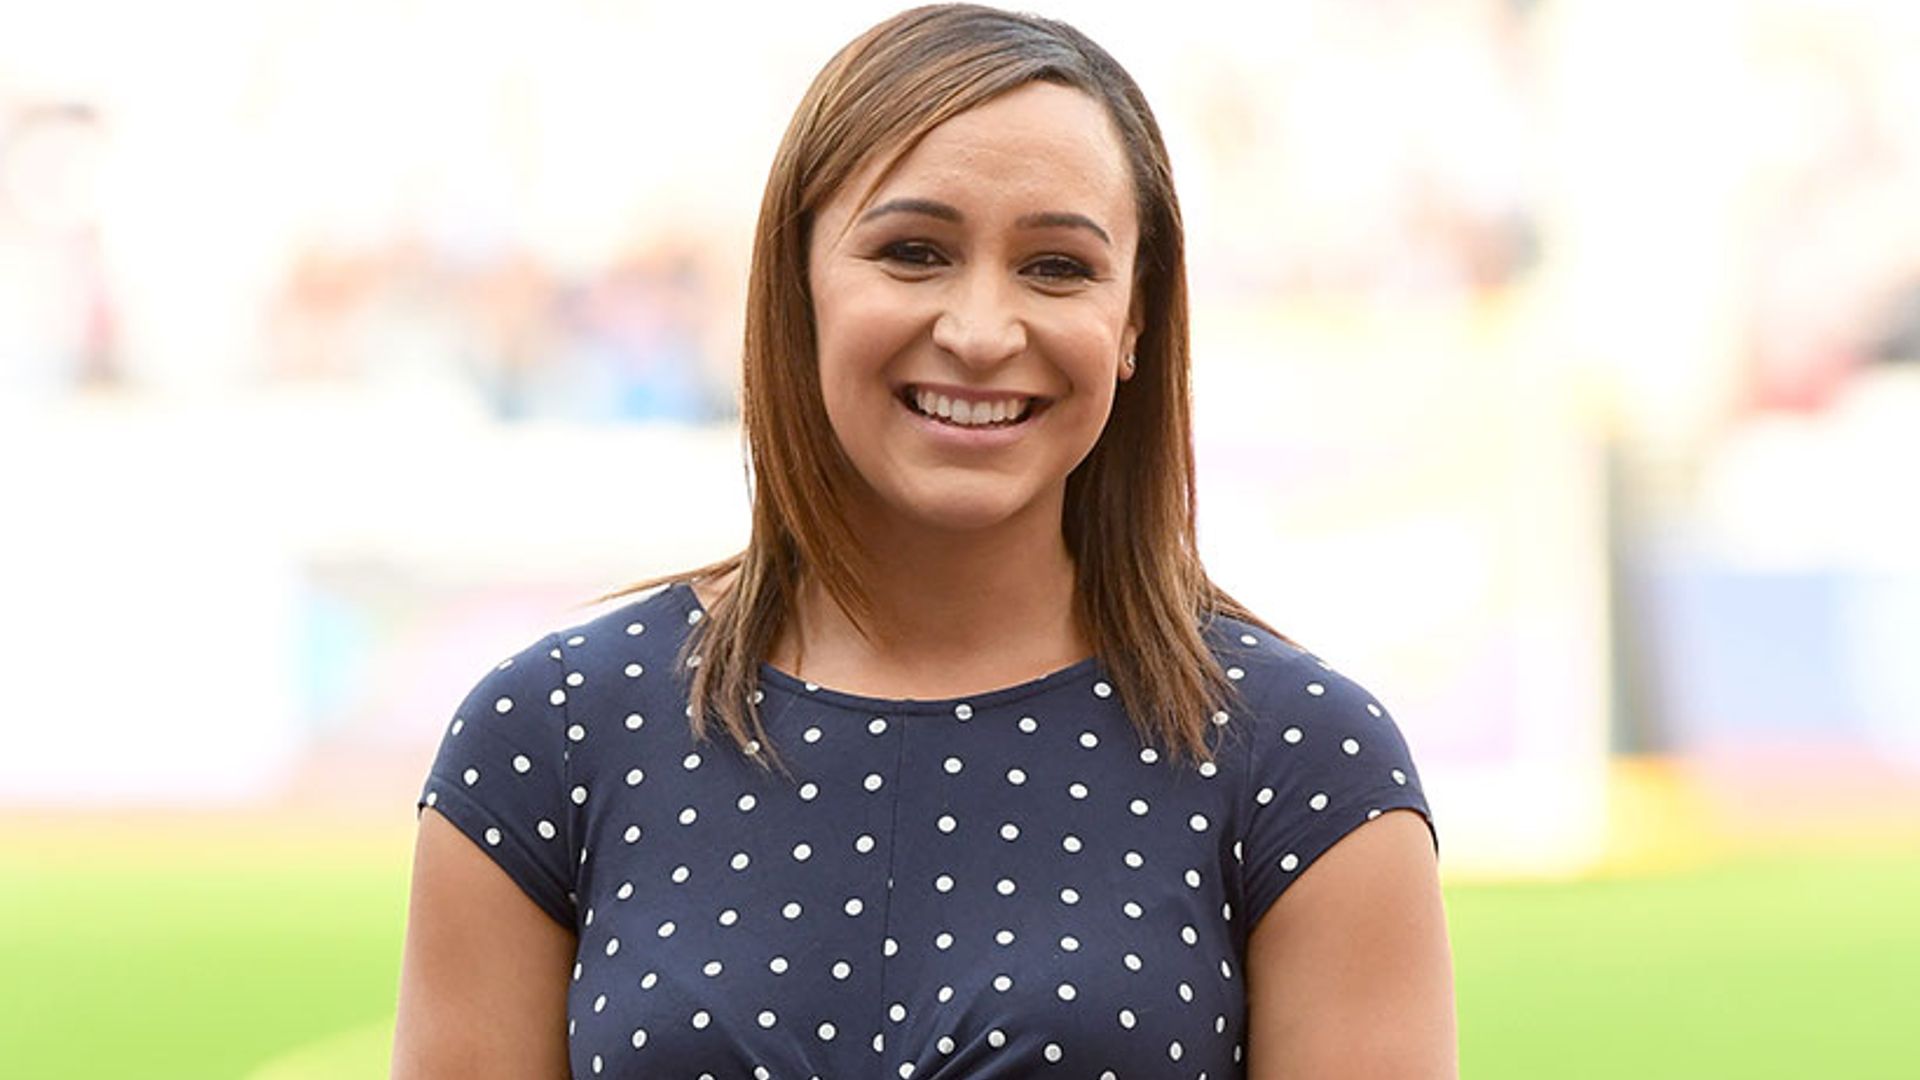 Jessica Ennis-Hill gives birth to second child - see the adorable announcement